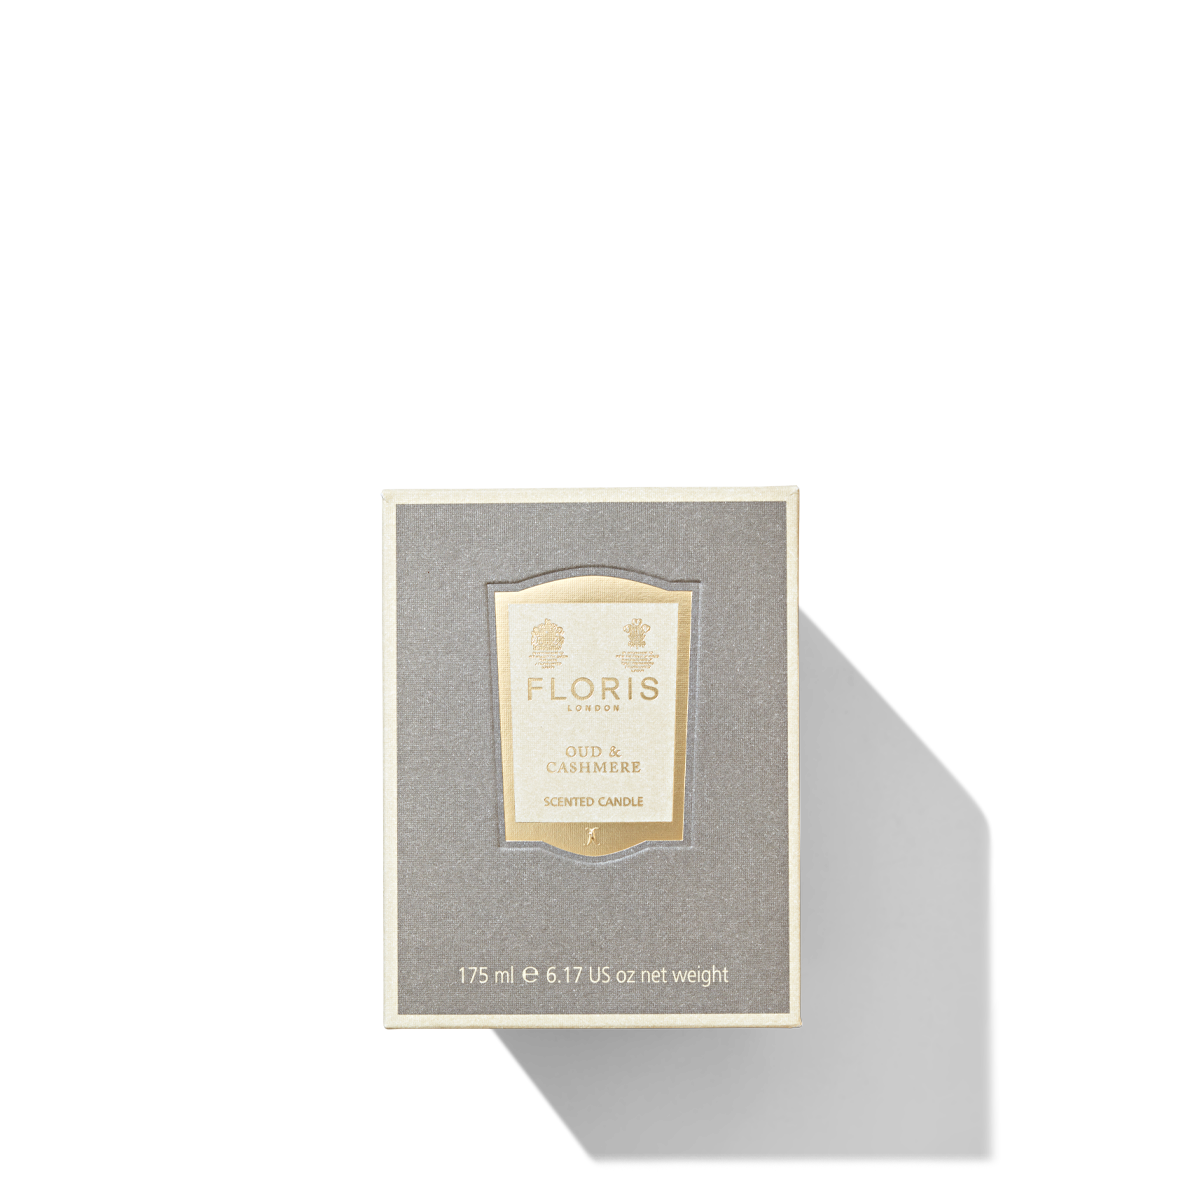 Medium square grey box with cream and gold label containing the Oud & Cashmere Candle